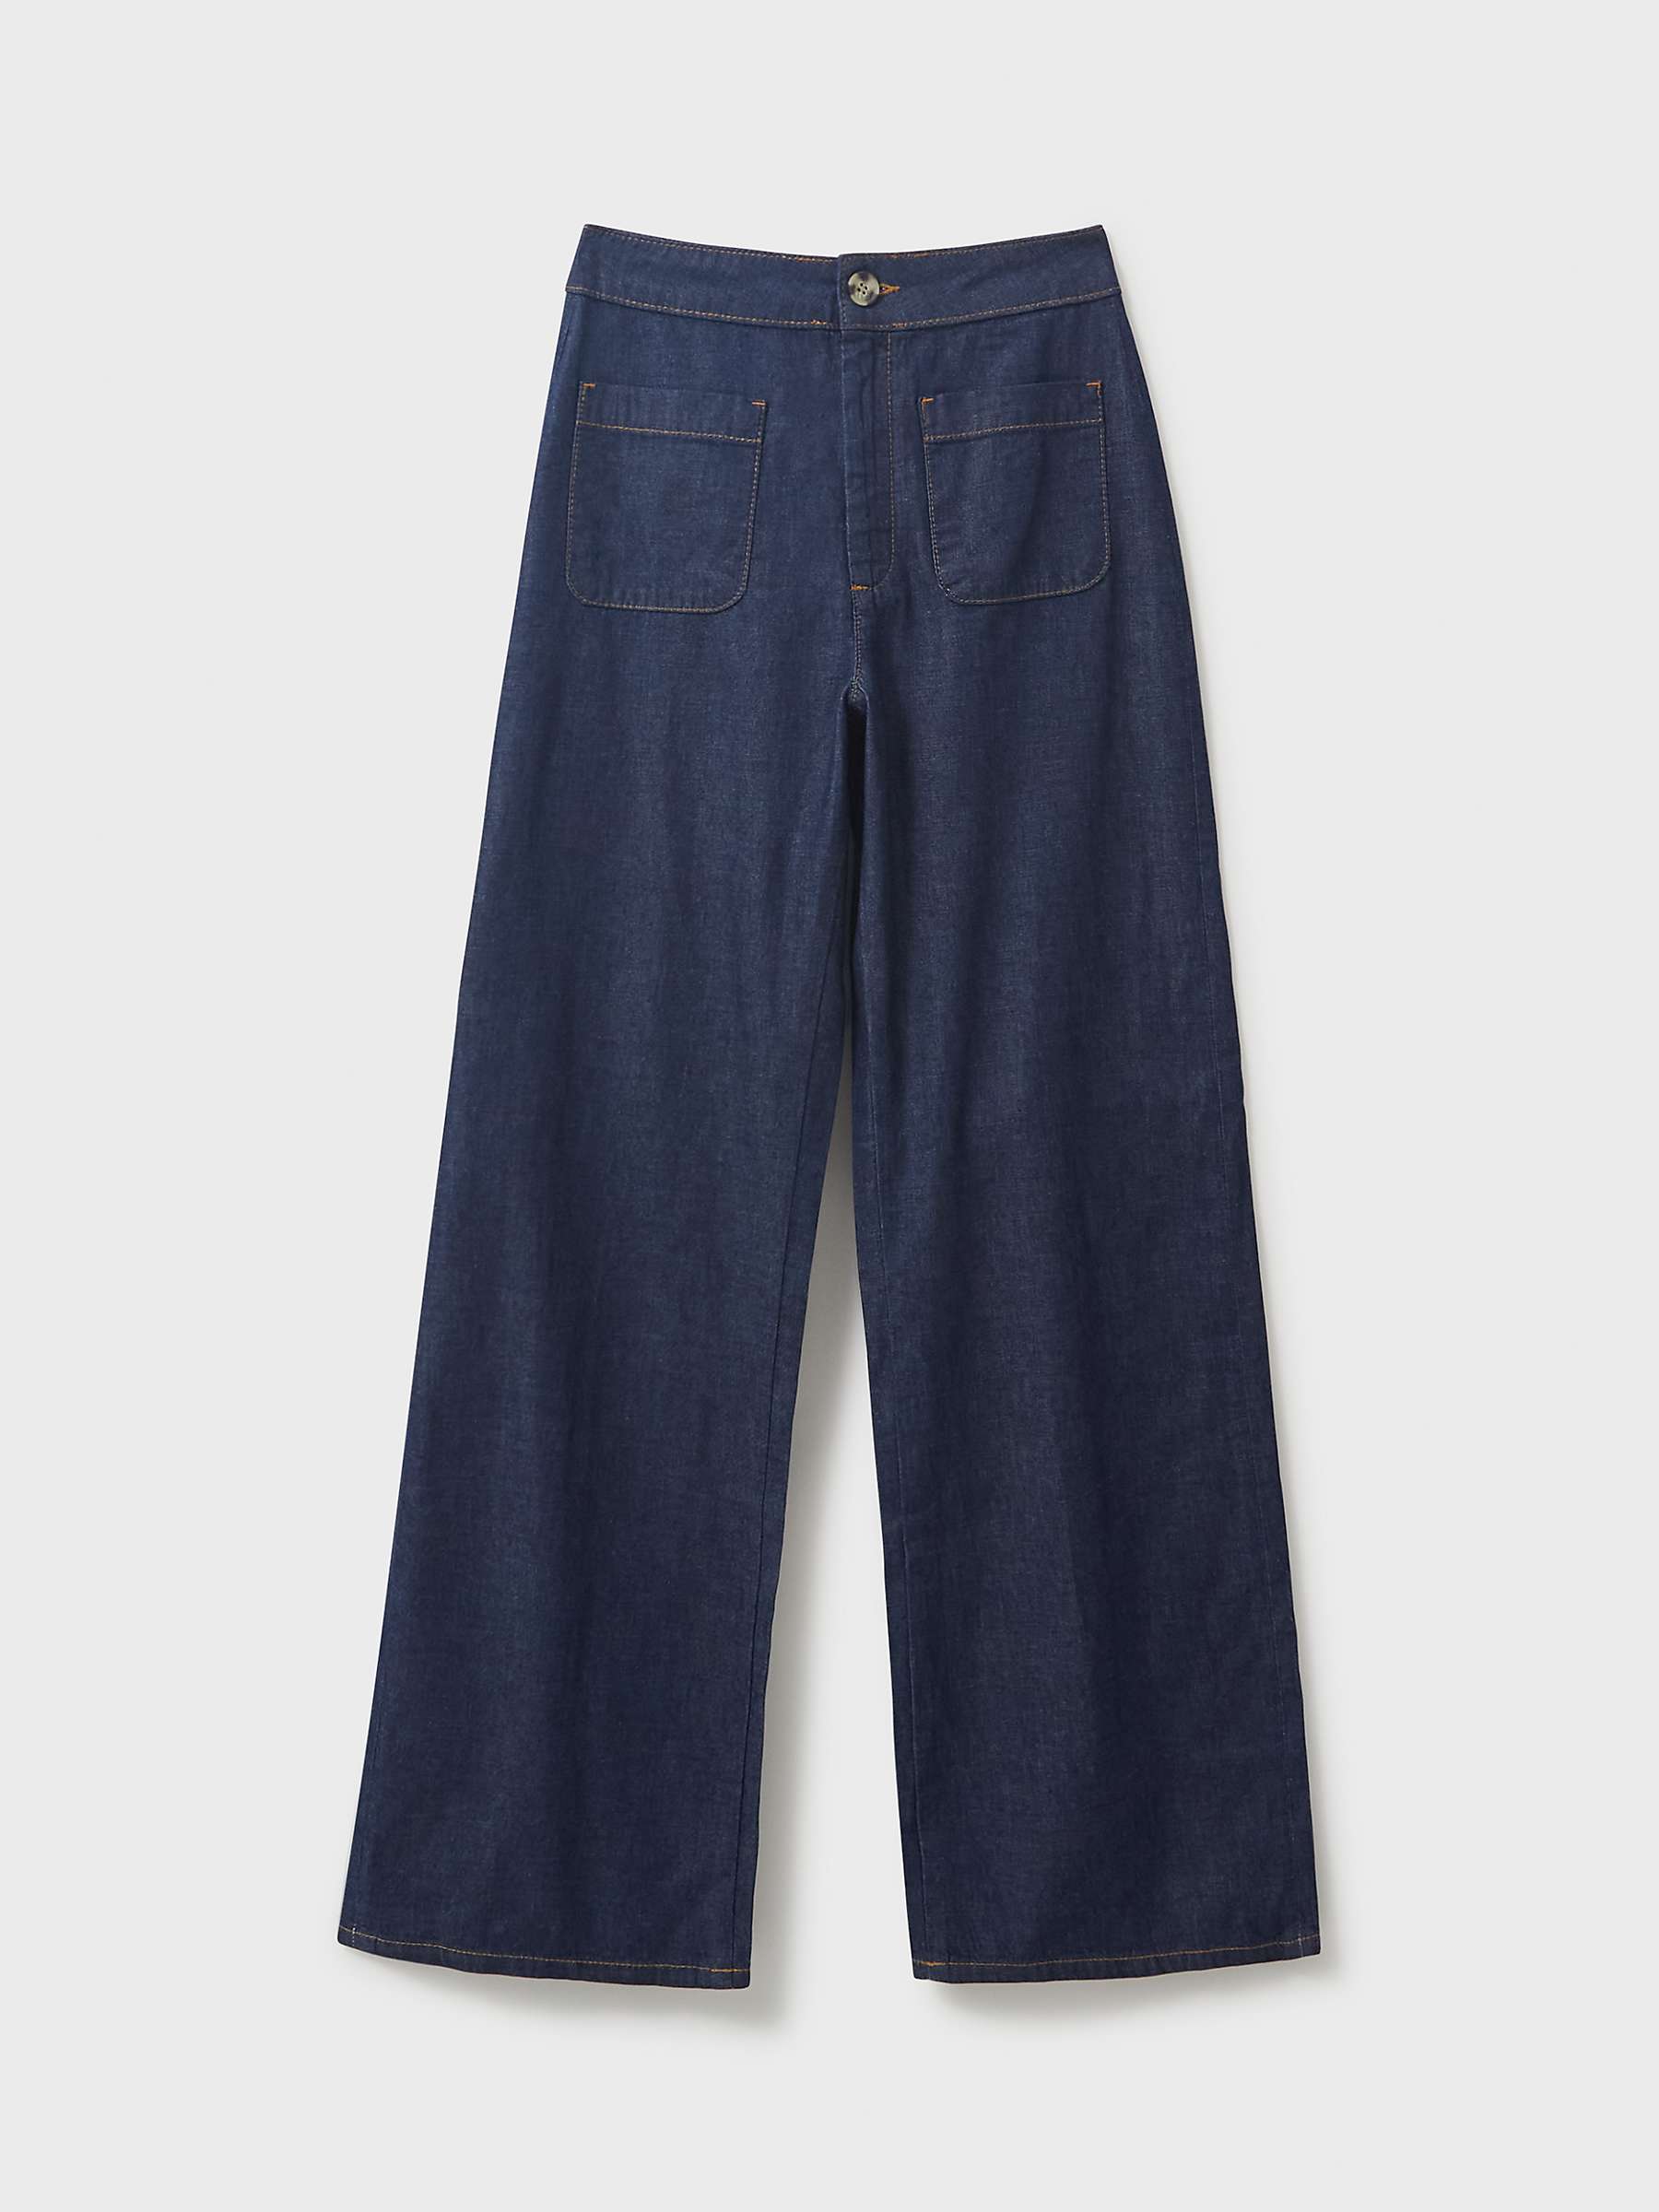 Buy Crew Clothing Patch Pocket Wide Leg Jeans Online at johnlewis.com